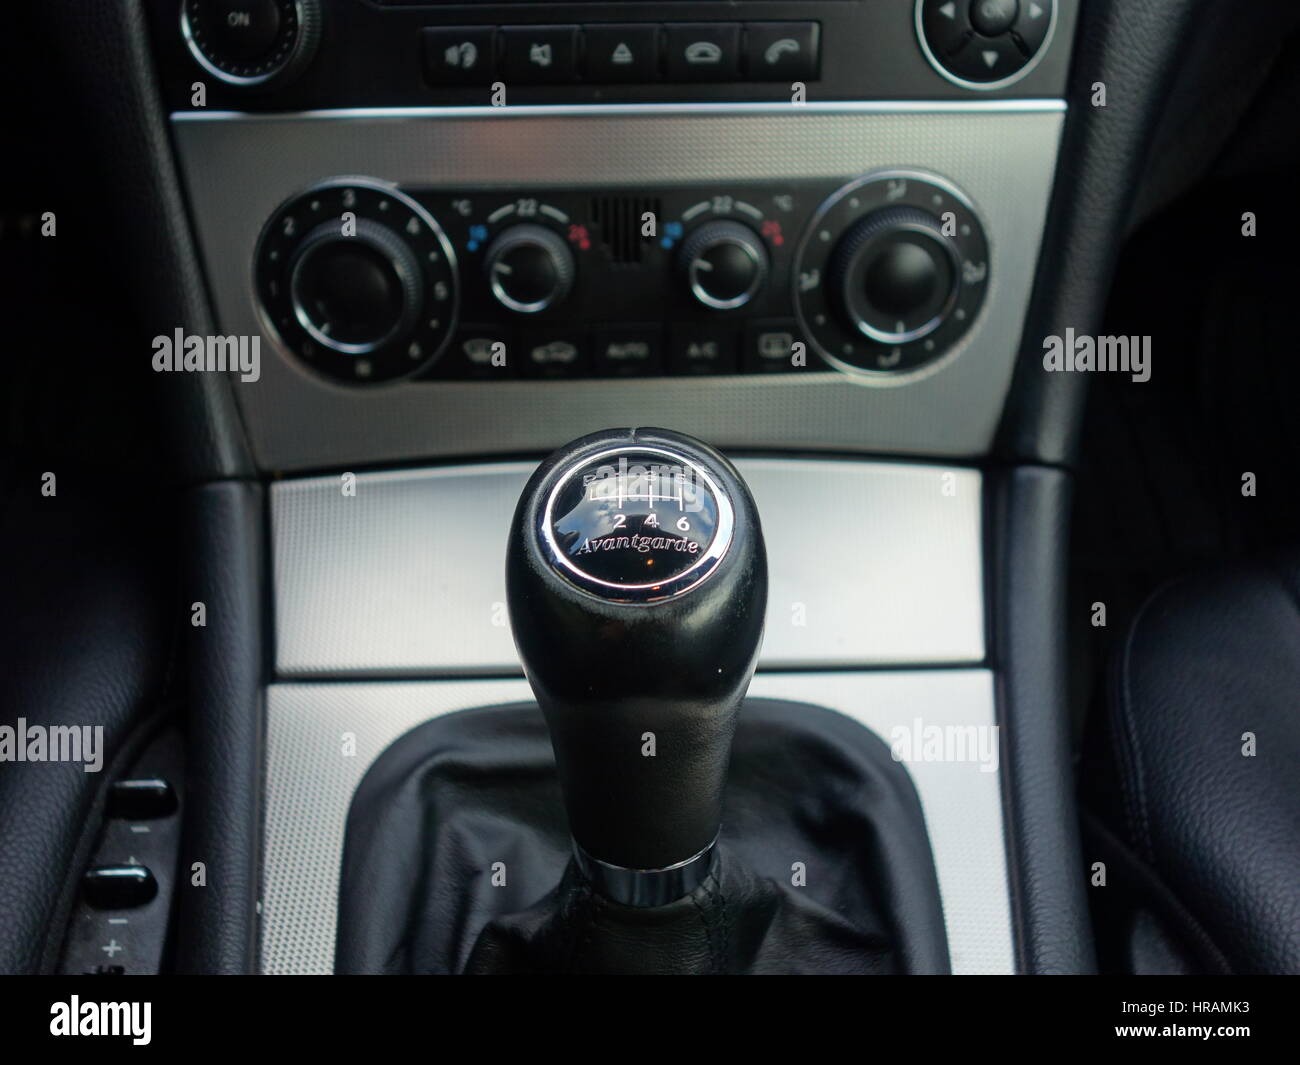 View of central panel dashboard unit with audio controls and climatisation  commands, heated seats buttons, vents, luxury car interior design Mercedes  Stock Photo - Alamy